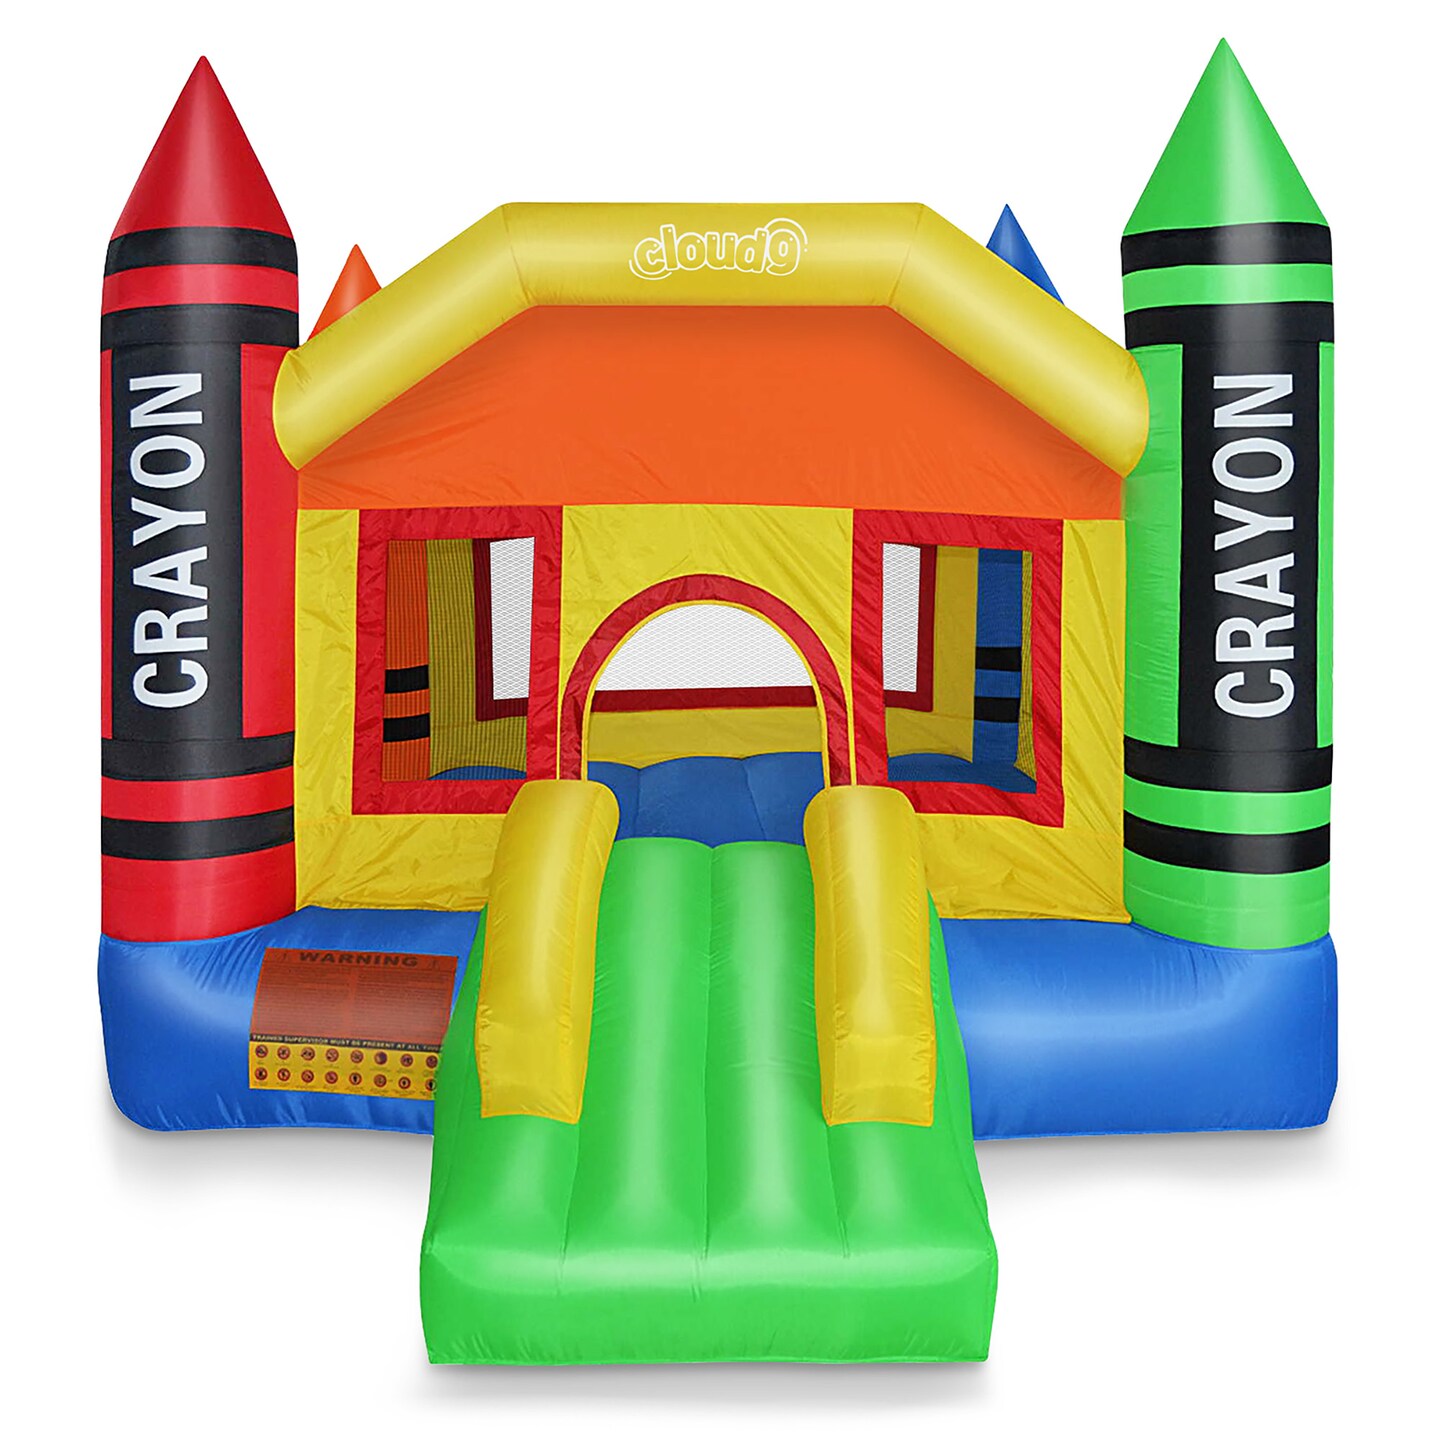 Cloud 9 Mini Crayon Bounce House with Blower - Inflatable Bouncer for Kids with Fun Slide